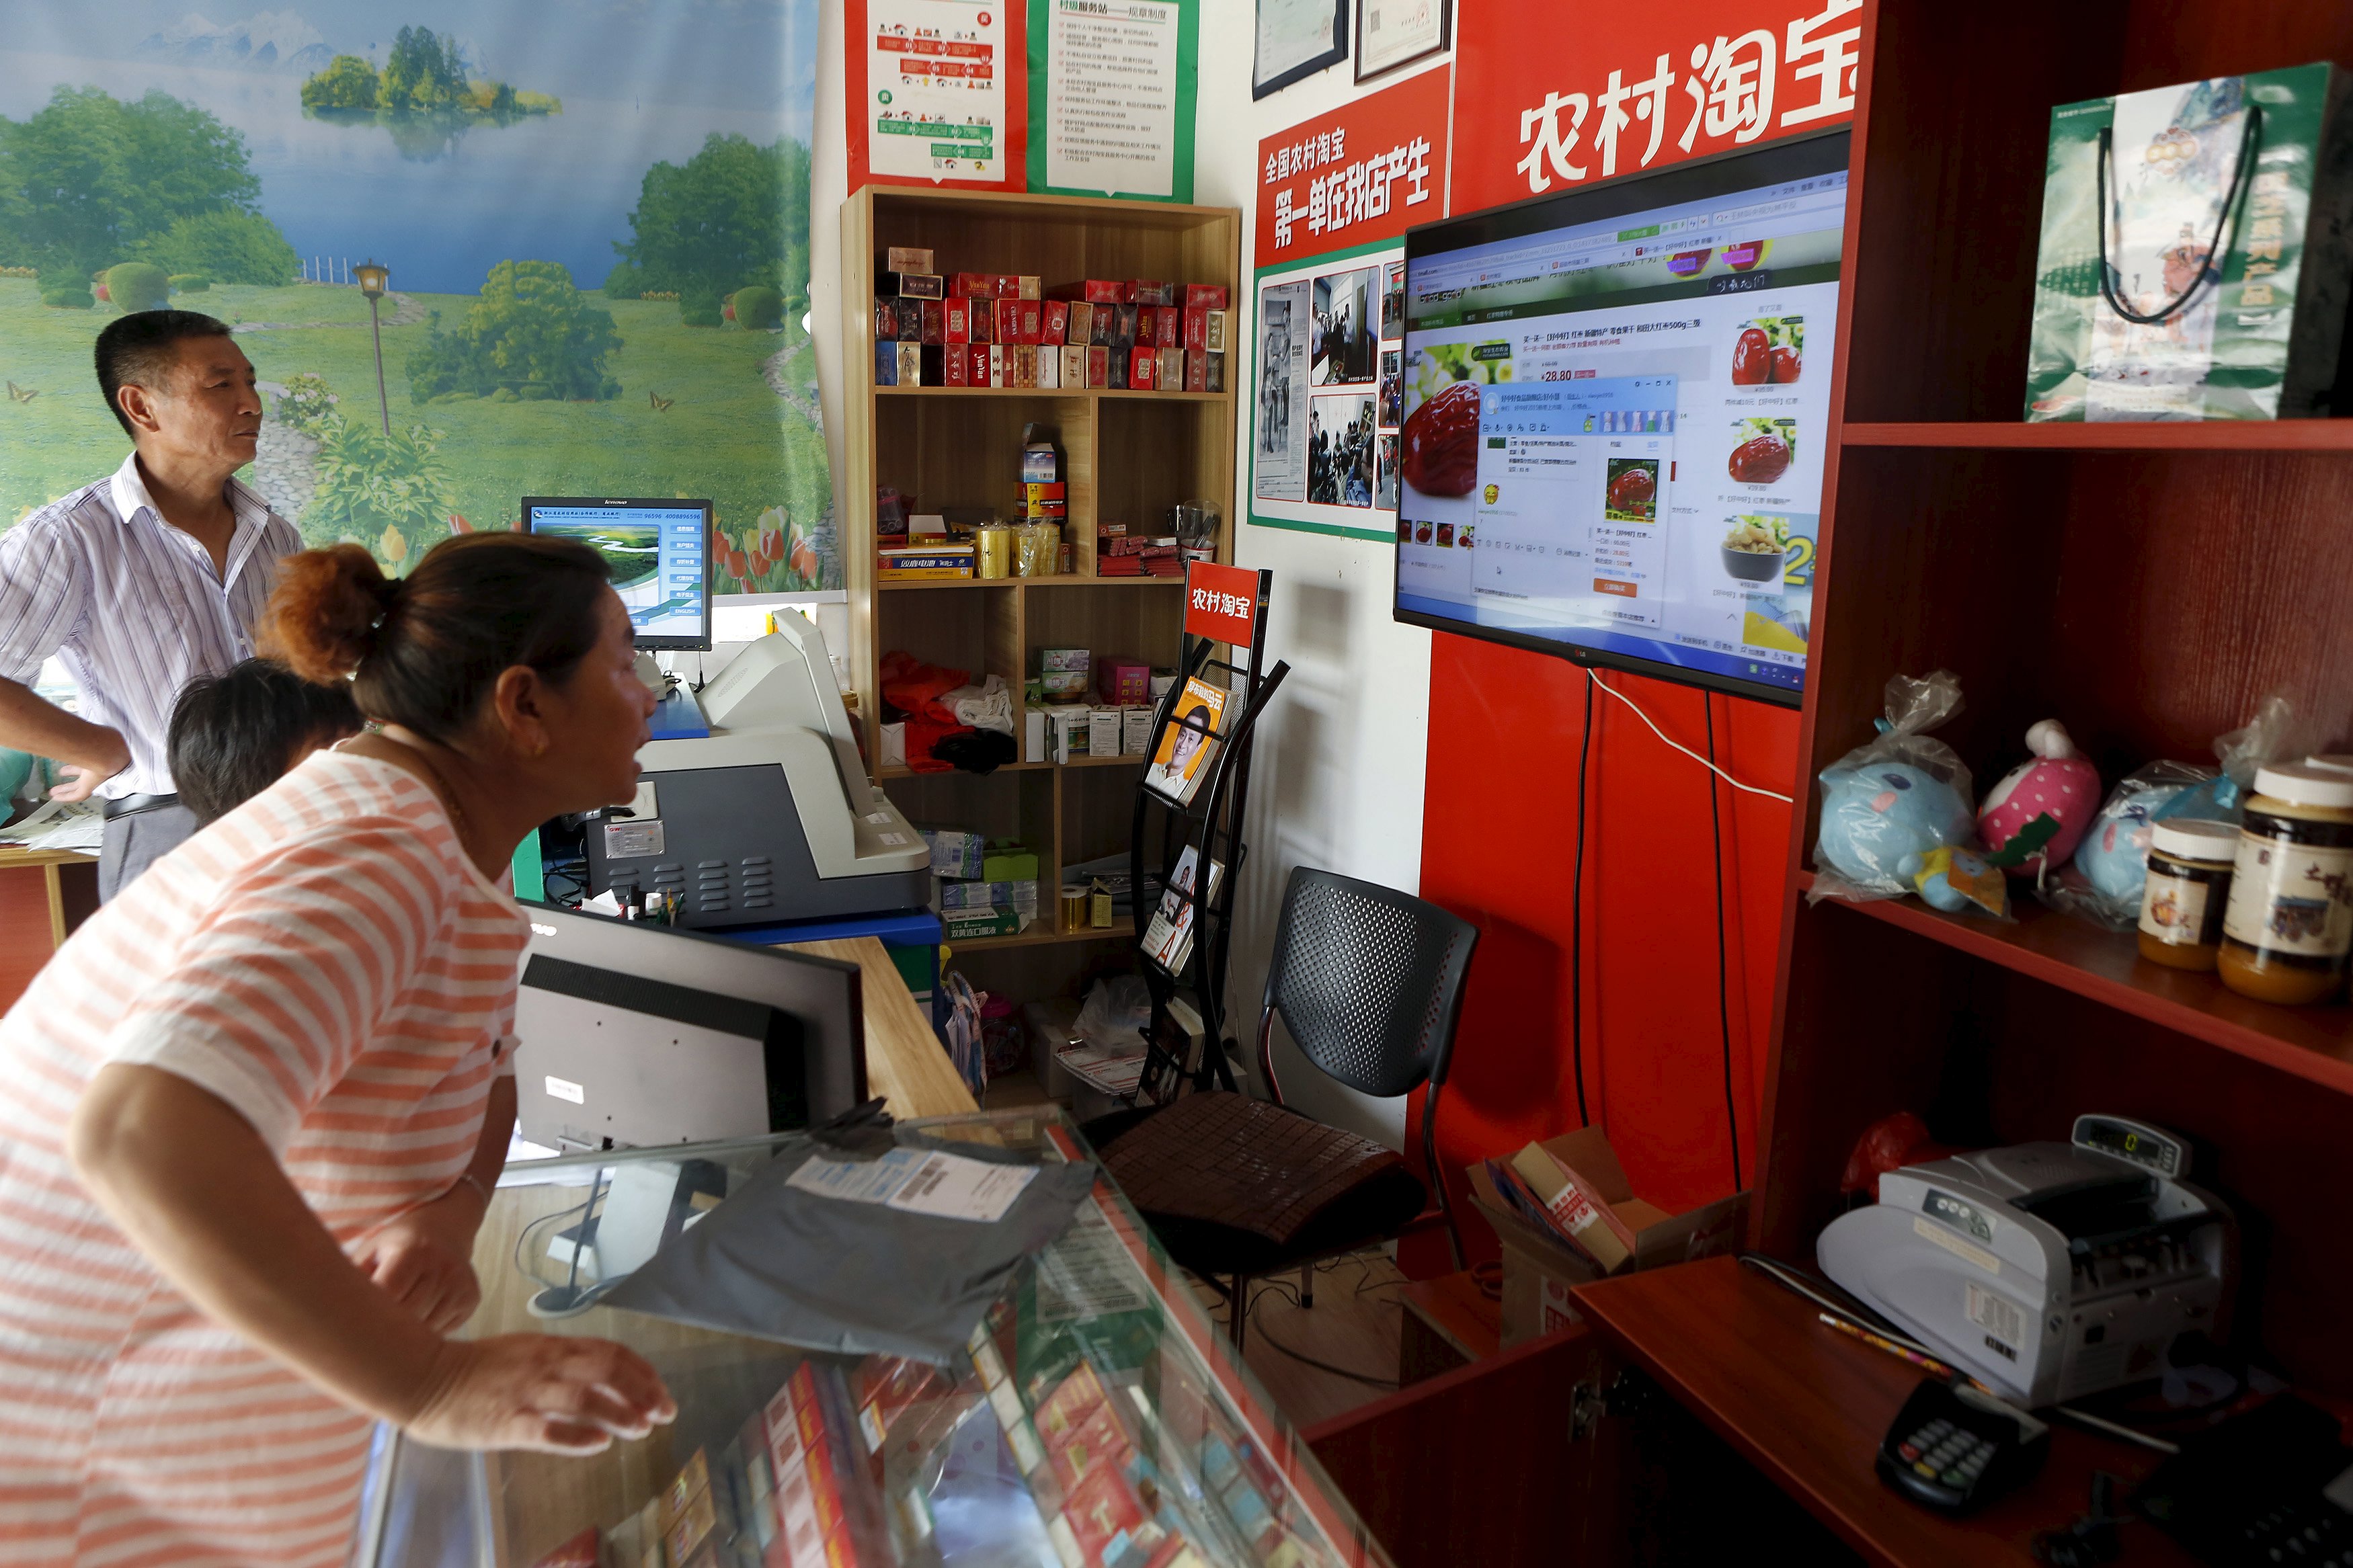 A customer shops at an Alibaba rural service centre in Jinjia Village, Tonglu, Zhejiang province, China, July 20, 2015. E-commerce growth in the countryside now outpaces that in major cities, though fewer than one tenth of online purchases made on Alibaba platforms were shipped to rural areas in the first quarter of this year. Alibaba estimates the potential market at 460 billion yuan ($74 billion) by next year. Picture taken July 20. REUTERS/Aly Song